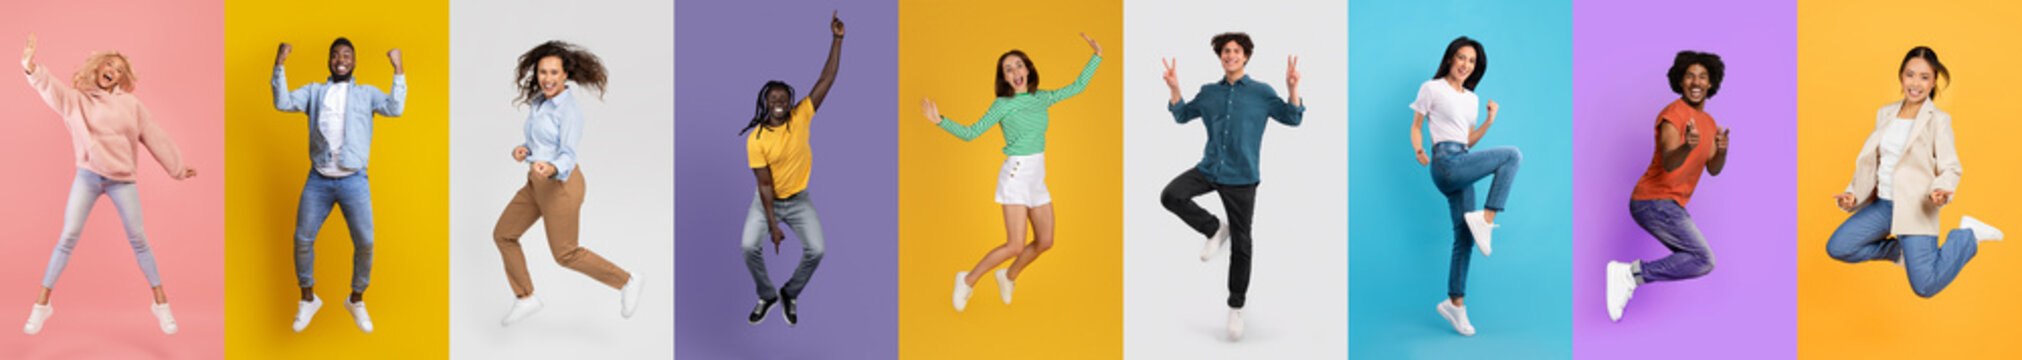 Diverse Group of Joyful People Leaping Against Colorful Backgrounds